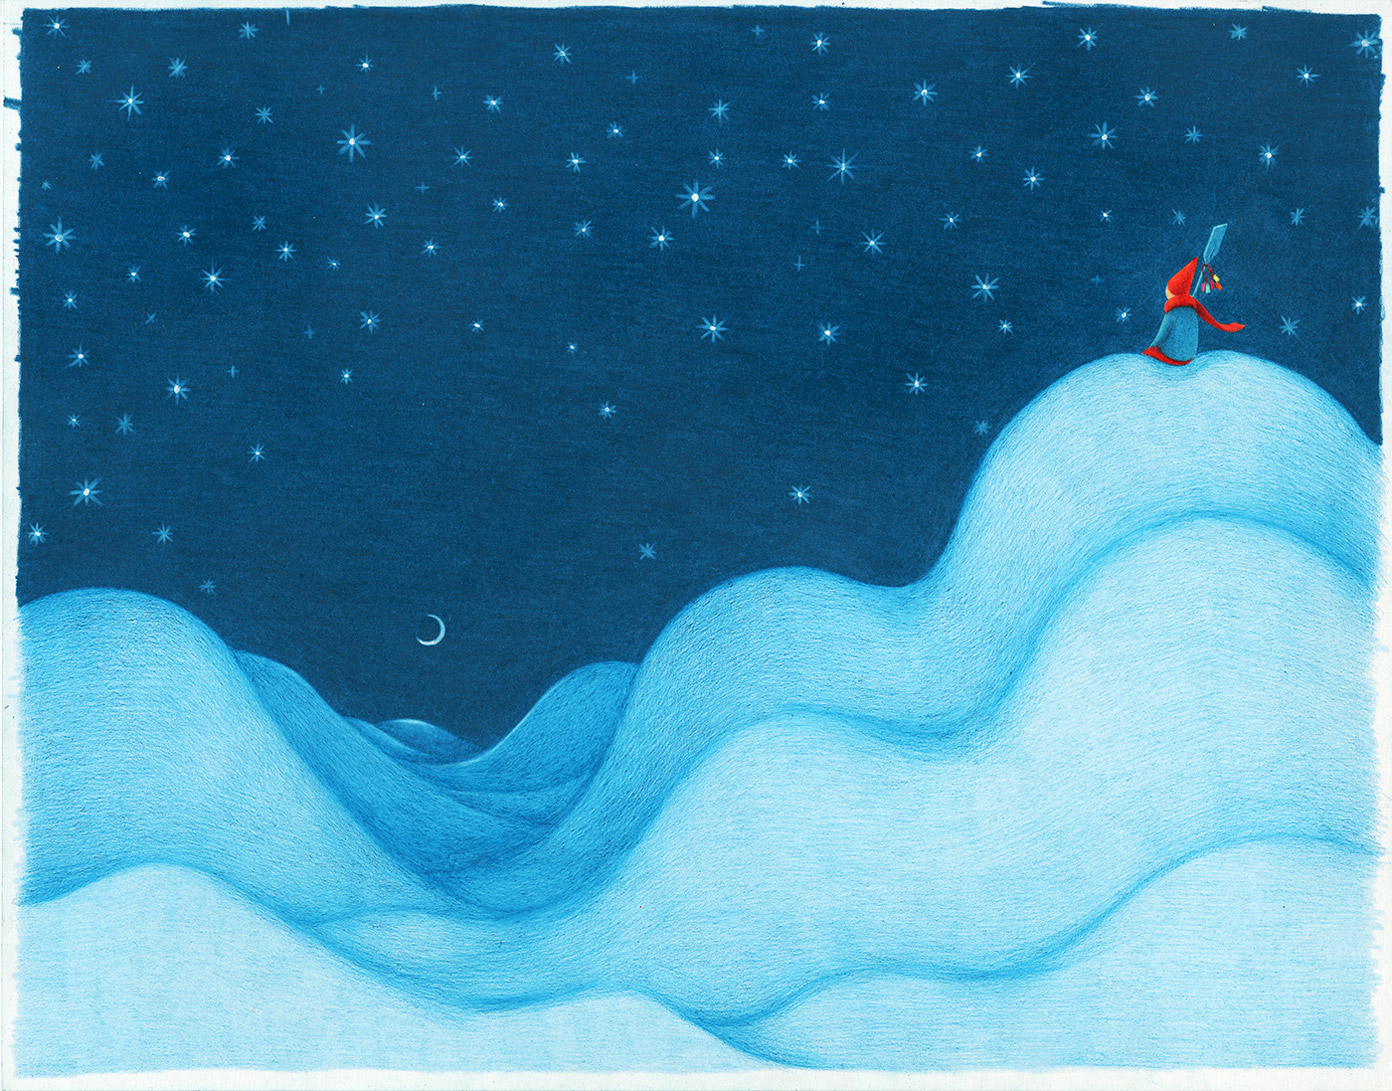 The Season Without Color—Children's book illustrations by Wenyi Geng